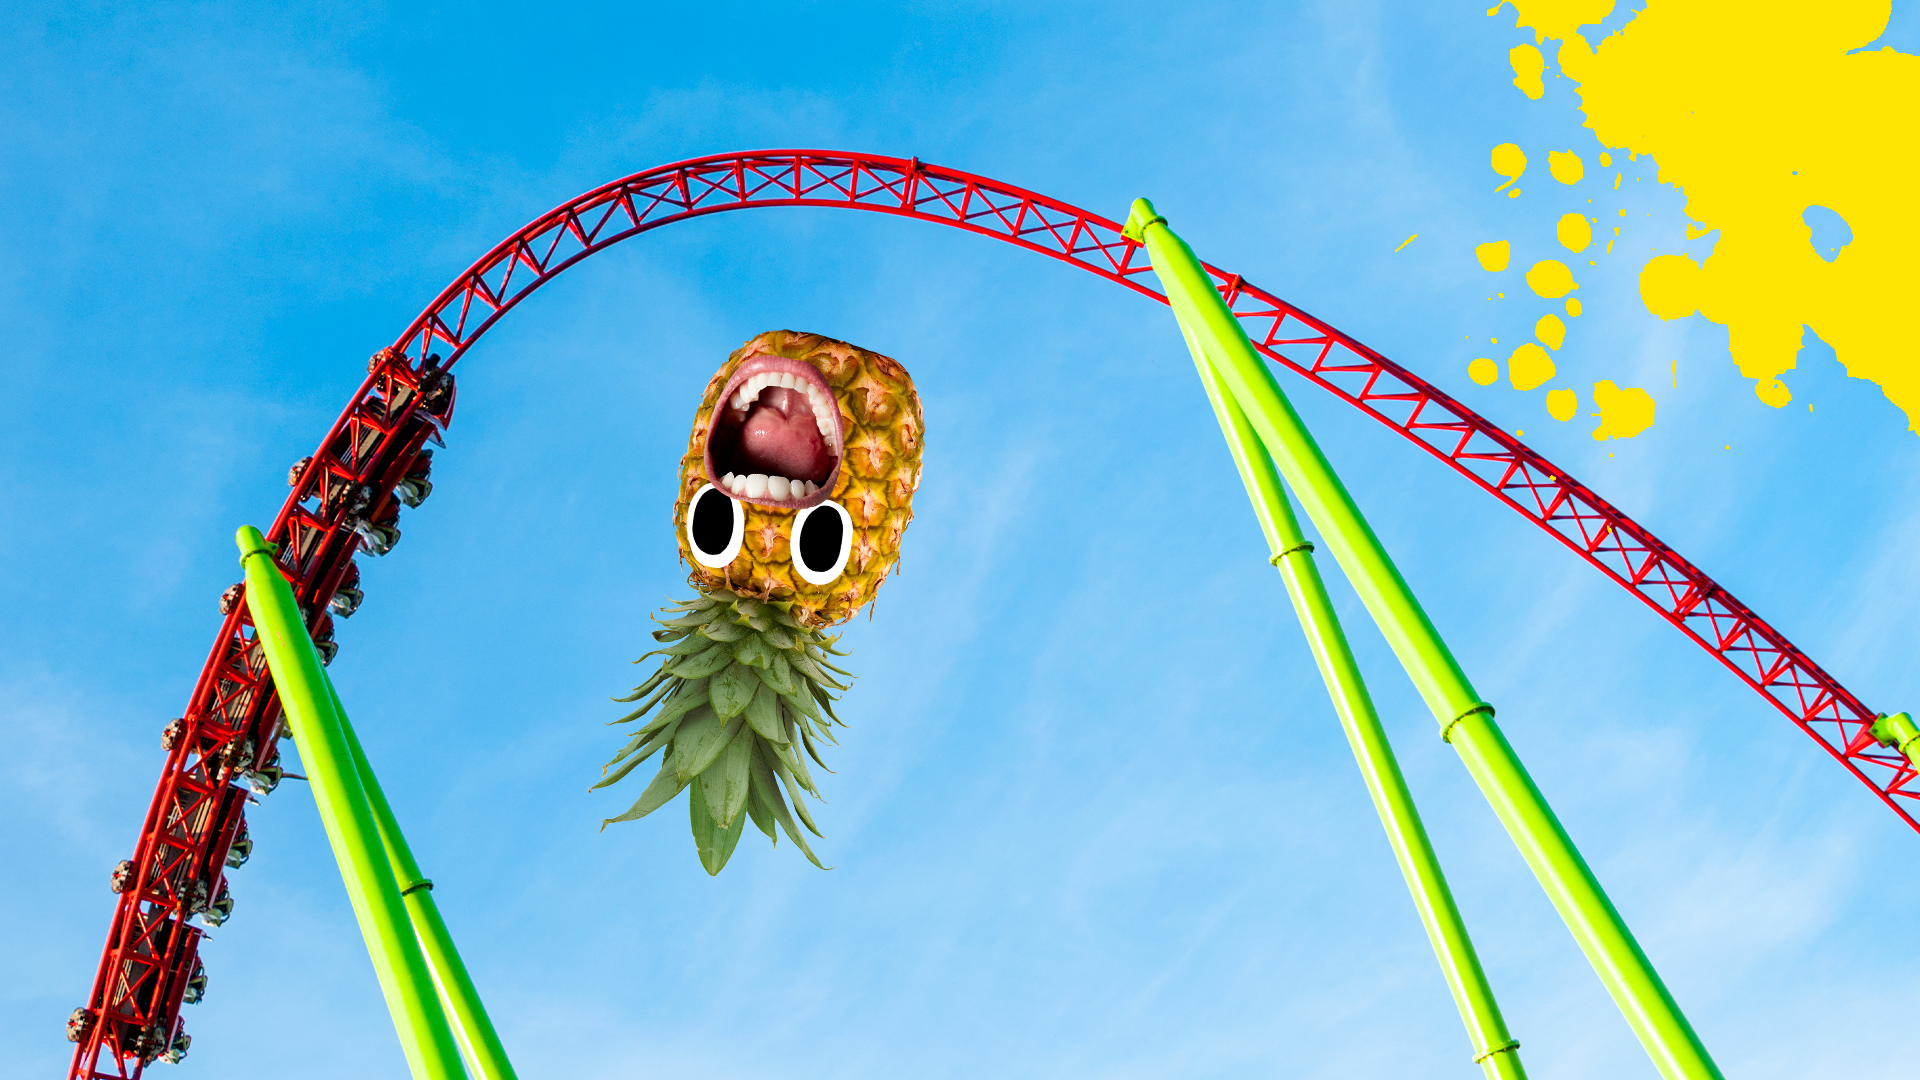 Screaming pineapple falling off a rollercoaster